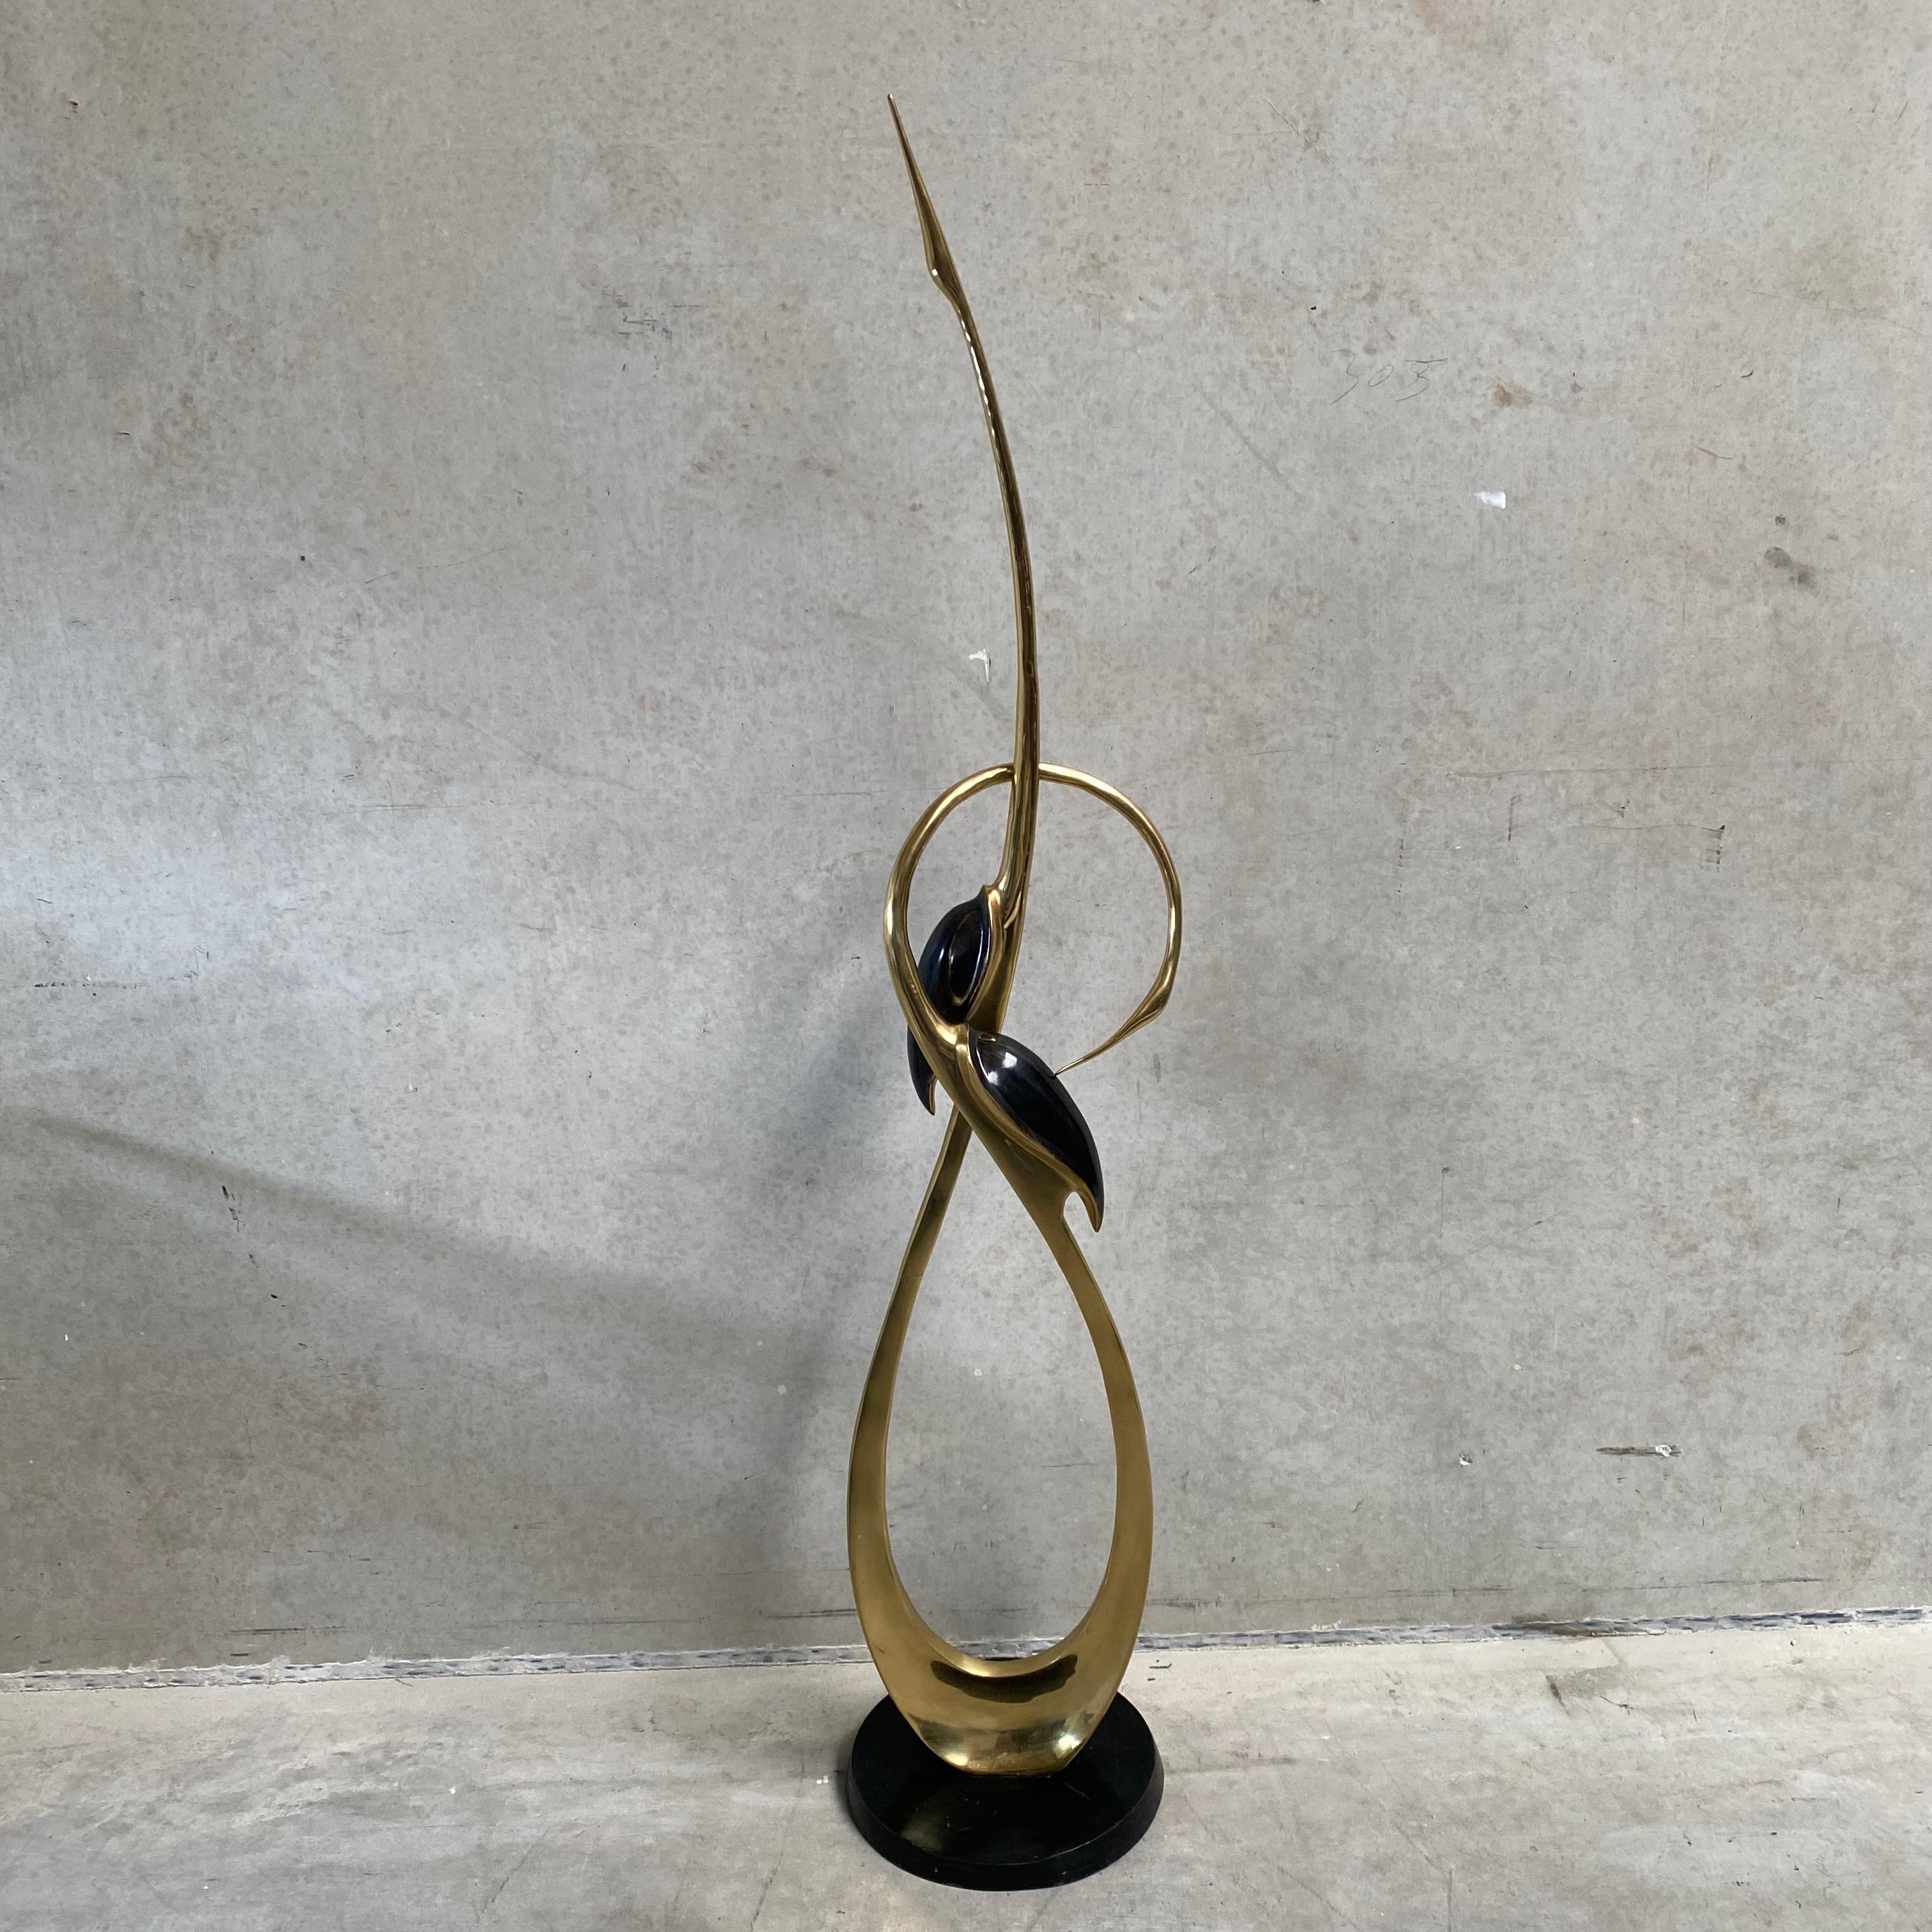 Tall Brass Entwined Cranes Sculpture by Boris Lovet Lorski For Sale 4